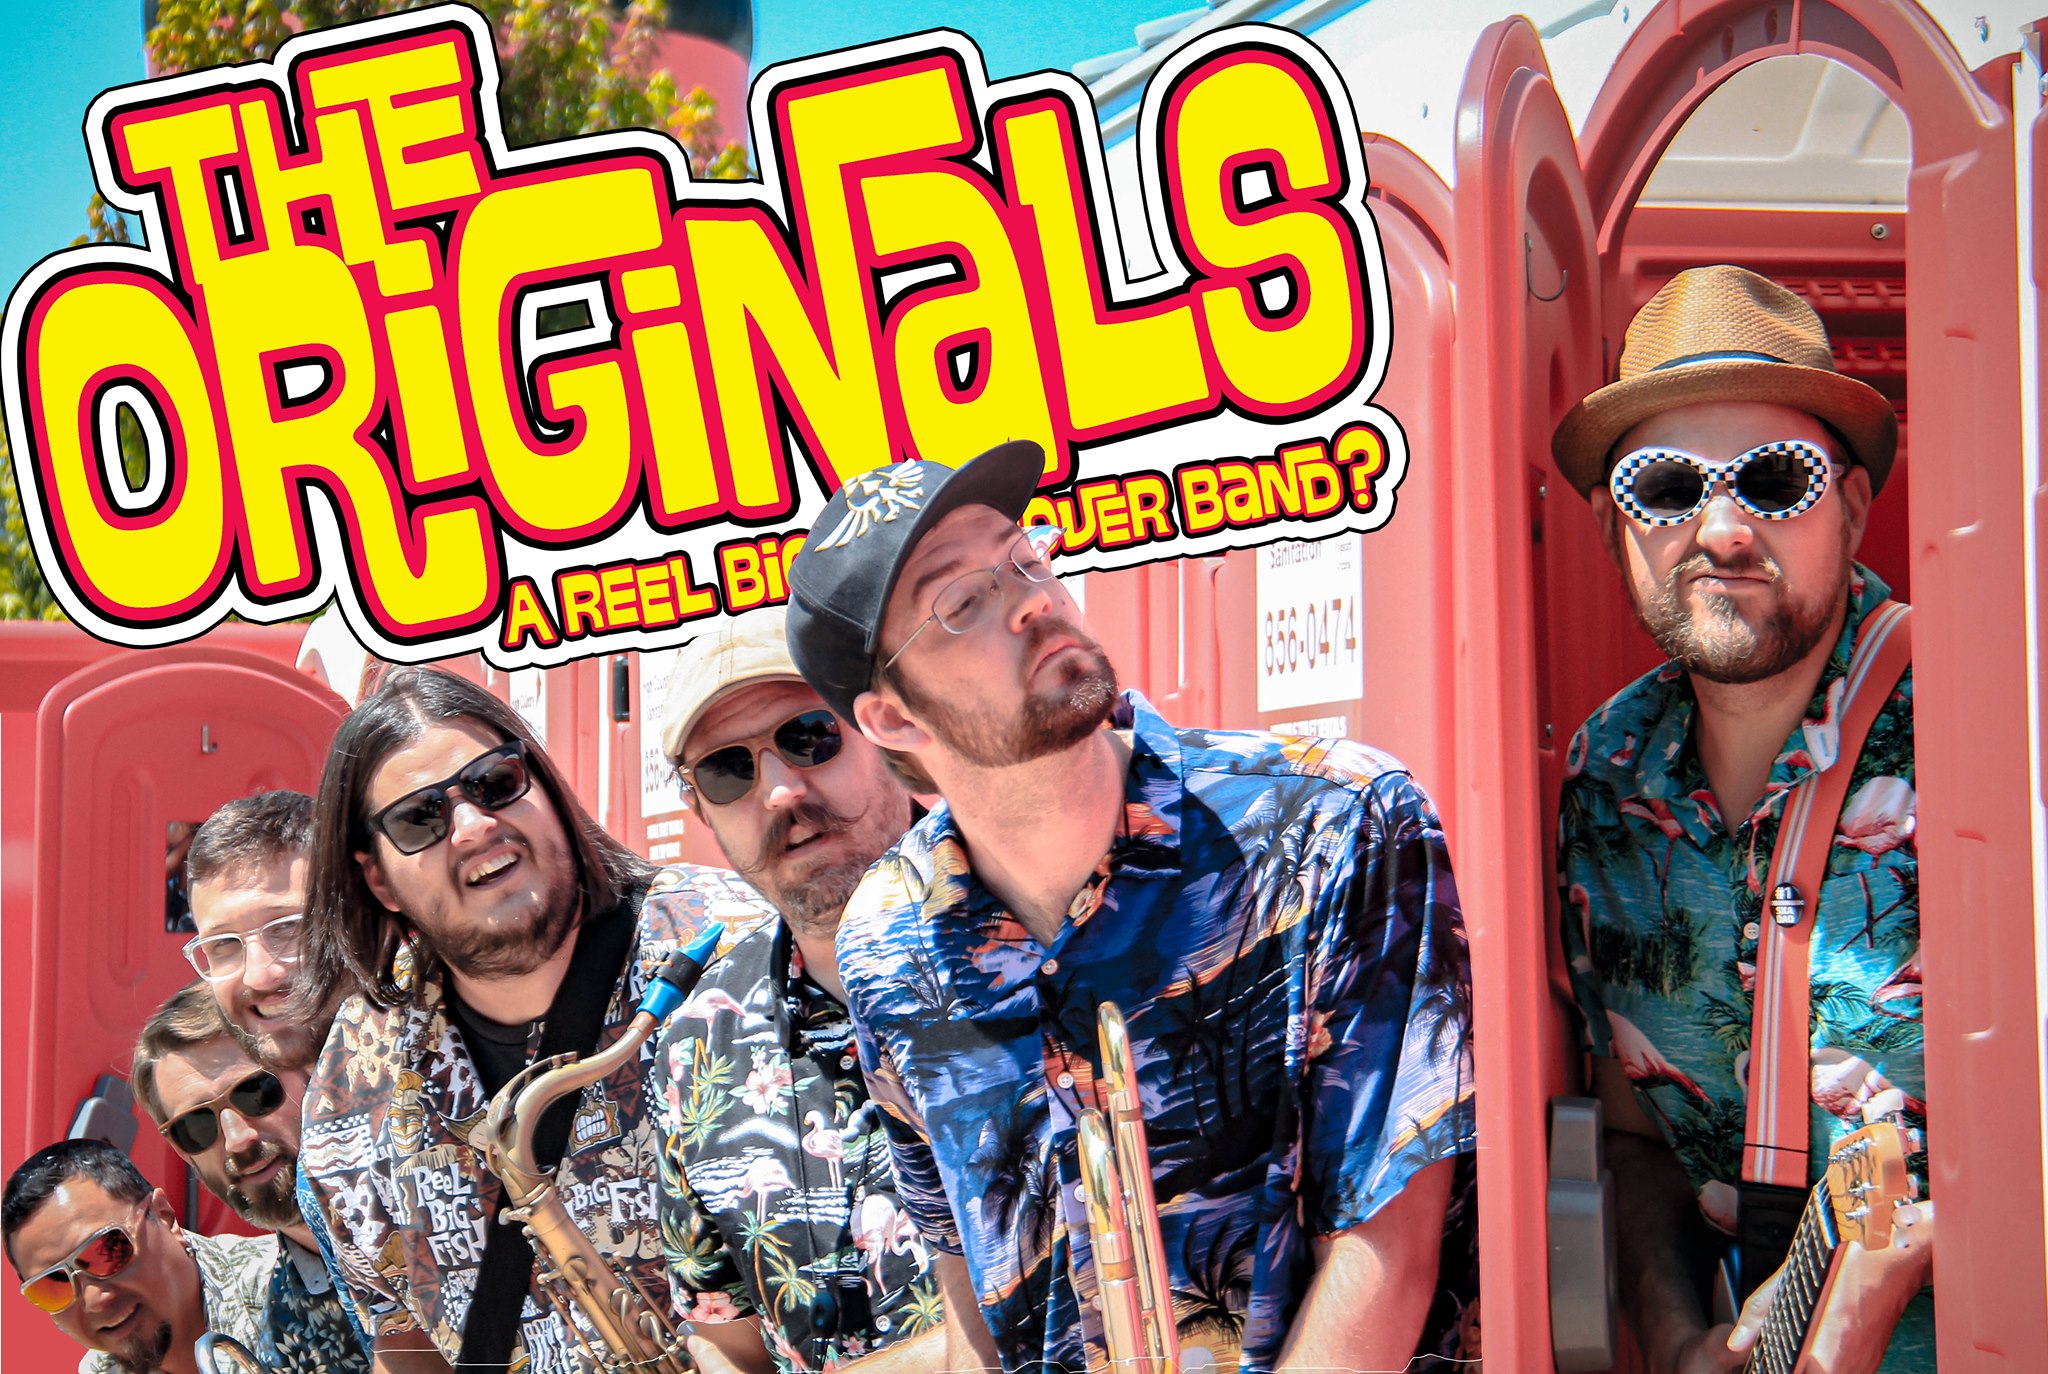 The Originals (Reel Big Fish Tribute Band) in the Gopher Hole! -  Weatherford Hotel